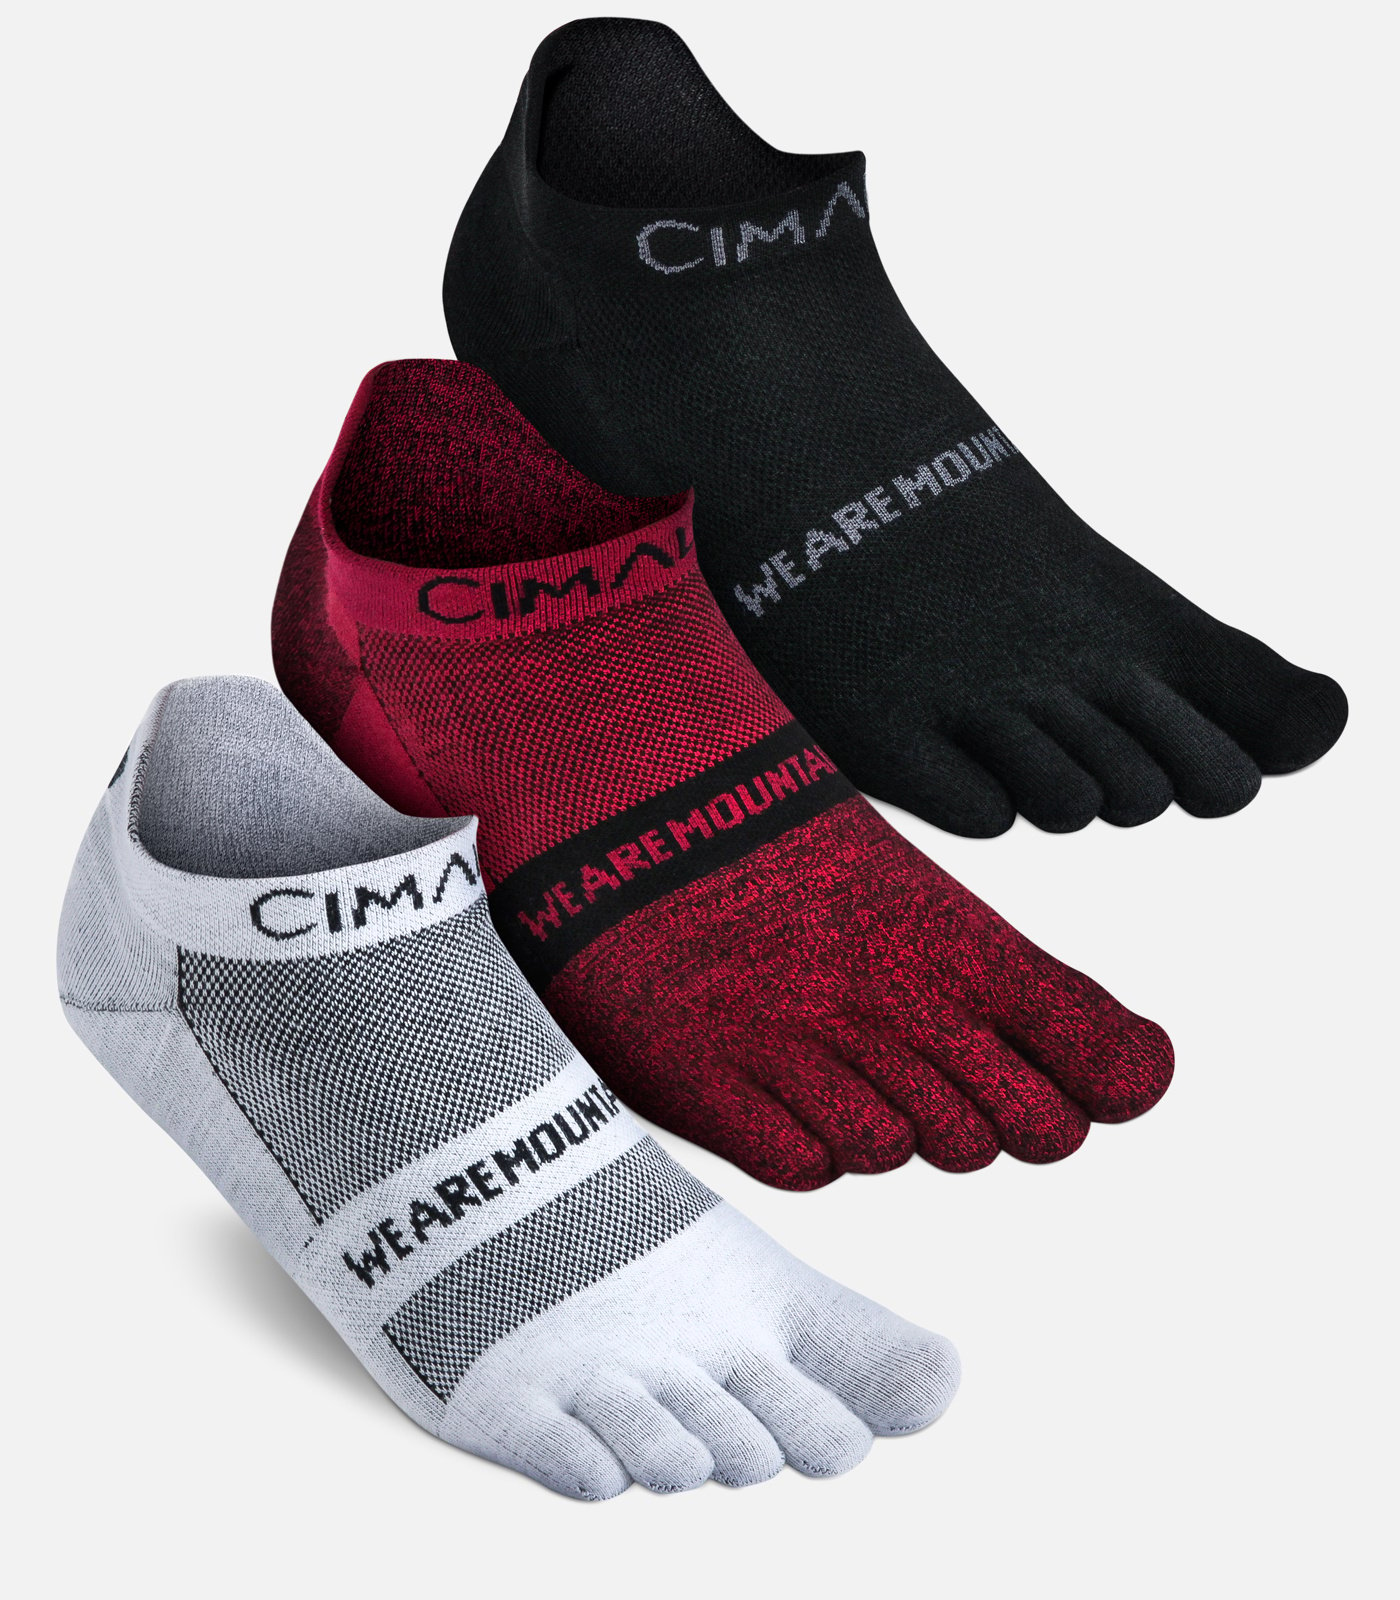 Chaussette doigts Trail Injinji Midweight Crew.Chaussettes FiveFingers